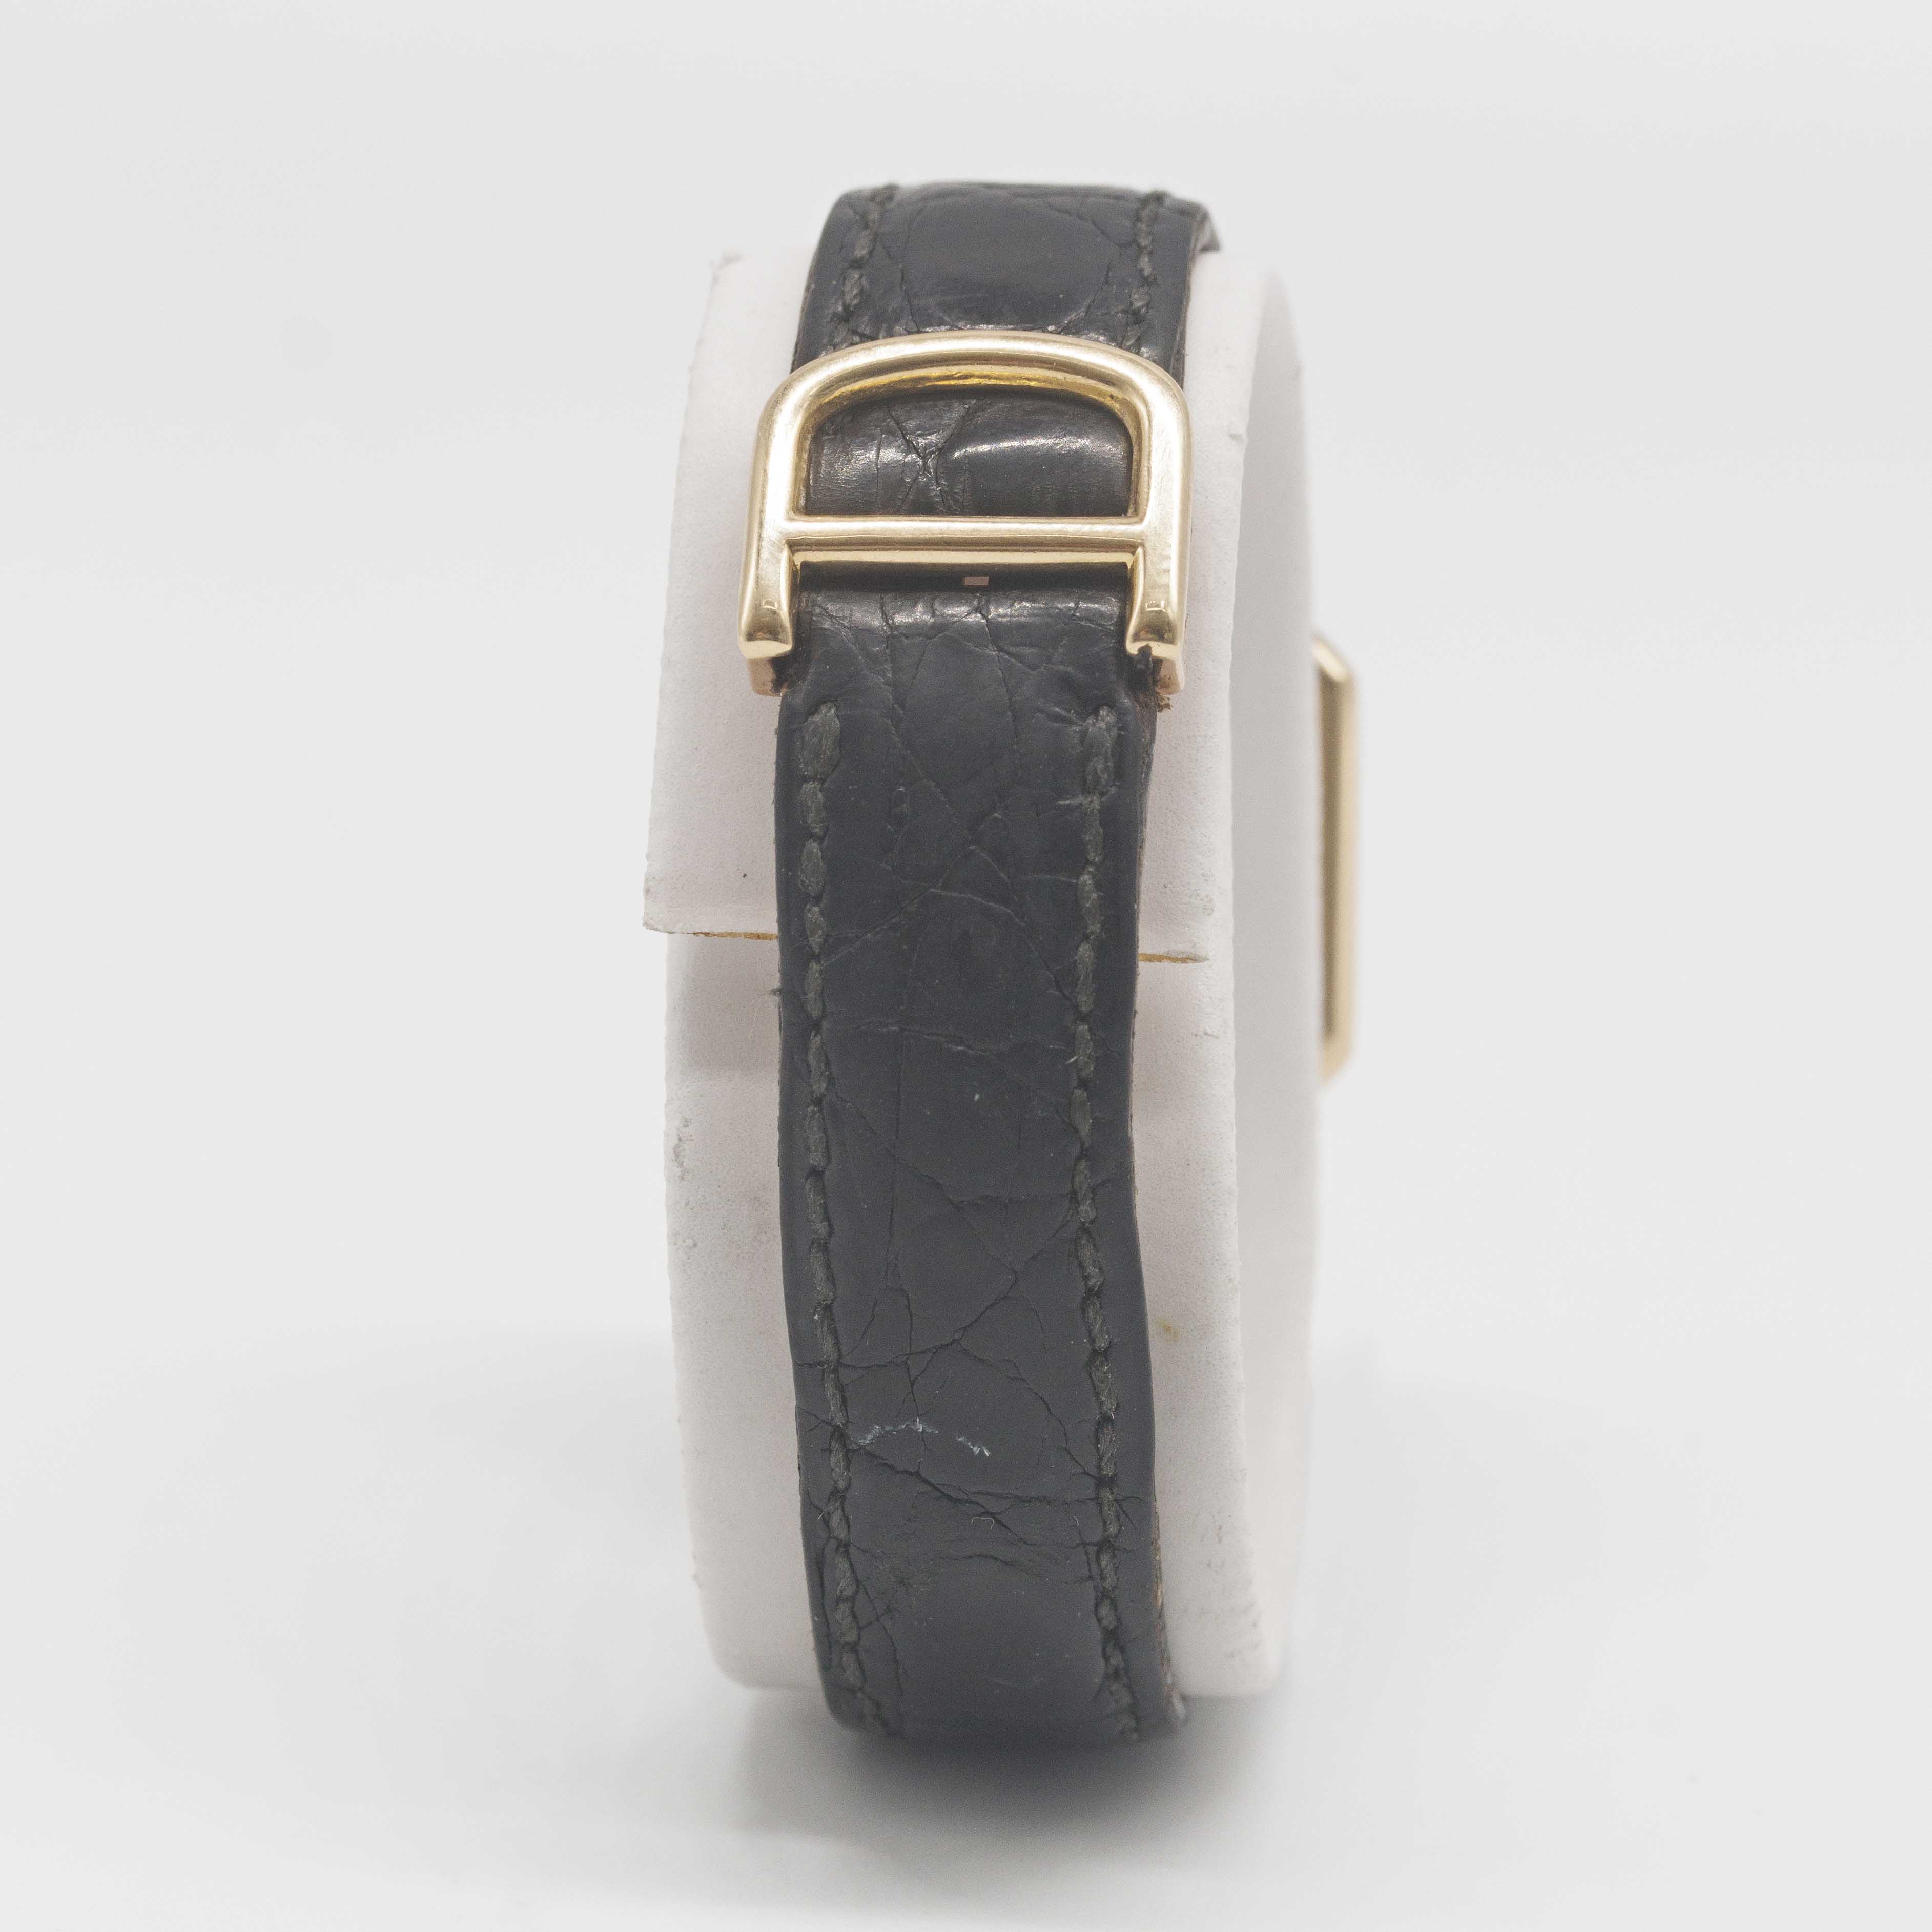 A LADIES 18K SOLID GOLD CARTIER CEINTURE WRIST WATCH CIRCA 1980 Movement: 17J, manual wind, cal. - Image 5 of 11